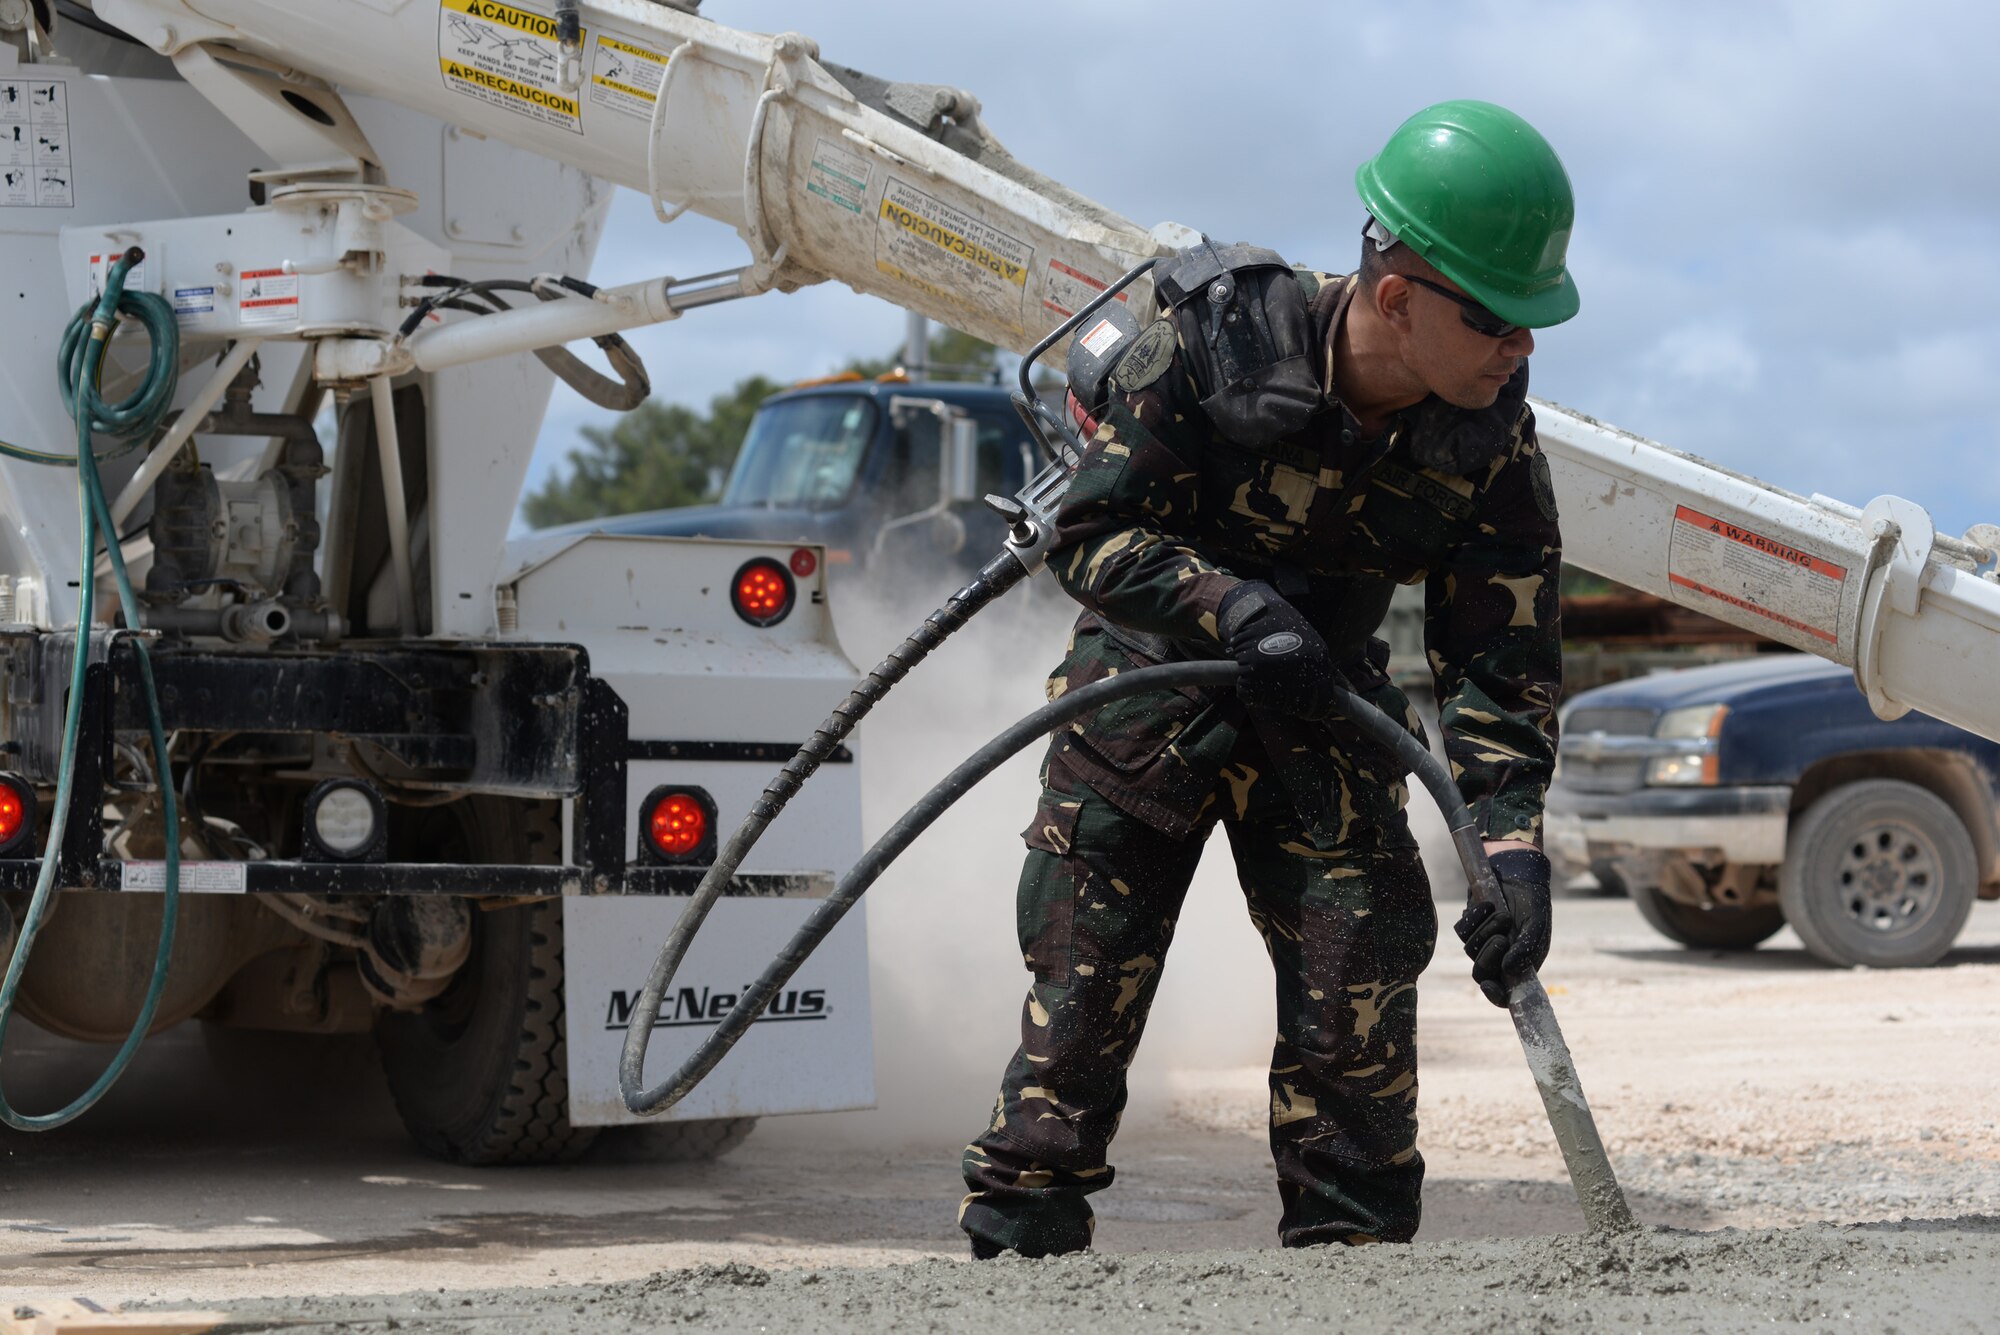 Philippine air force Sgt. Jufrey Laplana, Air Force Chief of Engineers Office NCO in charge of plans and programs, vibrates concrete to settle it in the form during a tilt-up workshop May 18, 2016, at Andersen Air Force Base, Guam. The Pacific Unity 16-1 tilt-up workshop is a Pacific Air Forces-led engagement focusing on a series of civil engineering subject-matter expert exchanges designed to increase partner capabilities, military relations and regional stability for the Indo-Asia-Pacific region. (U.S. Air Force photo by Airman 1st Class Jacob Skovo)